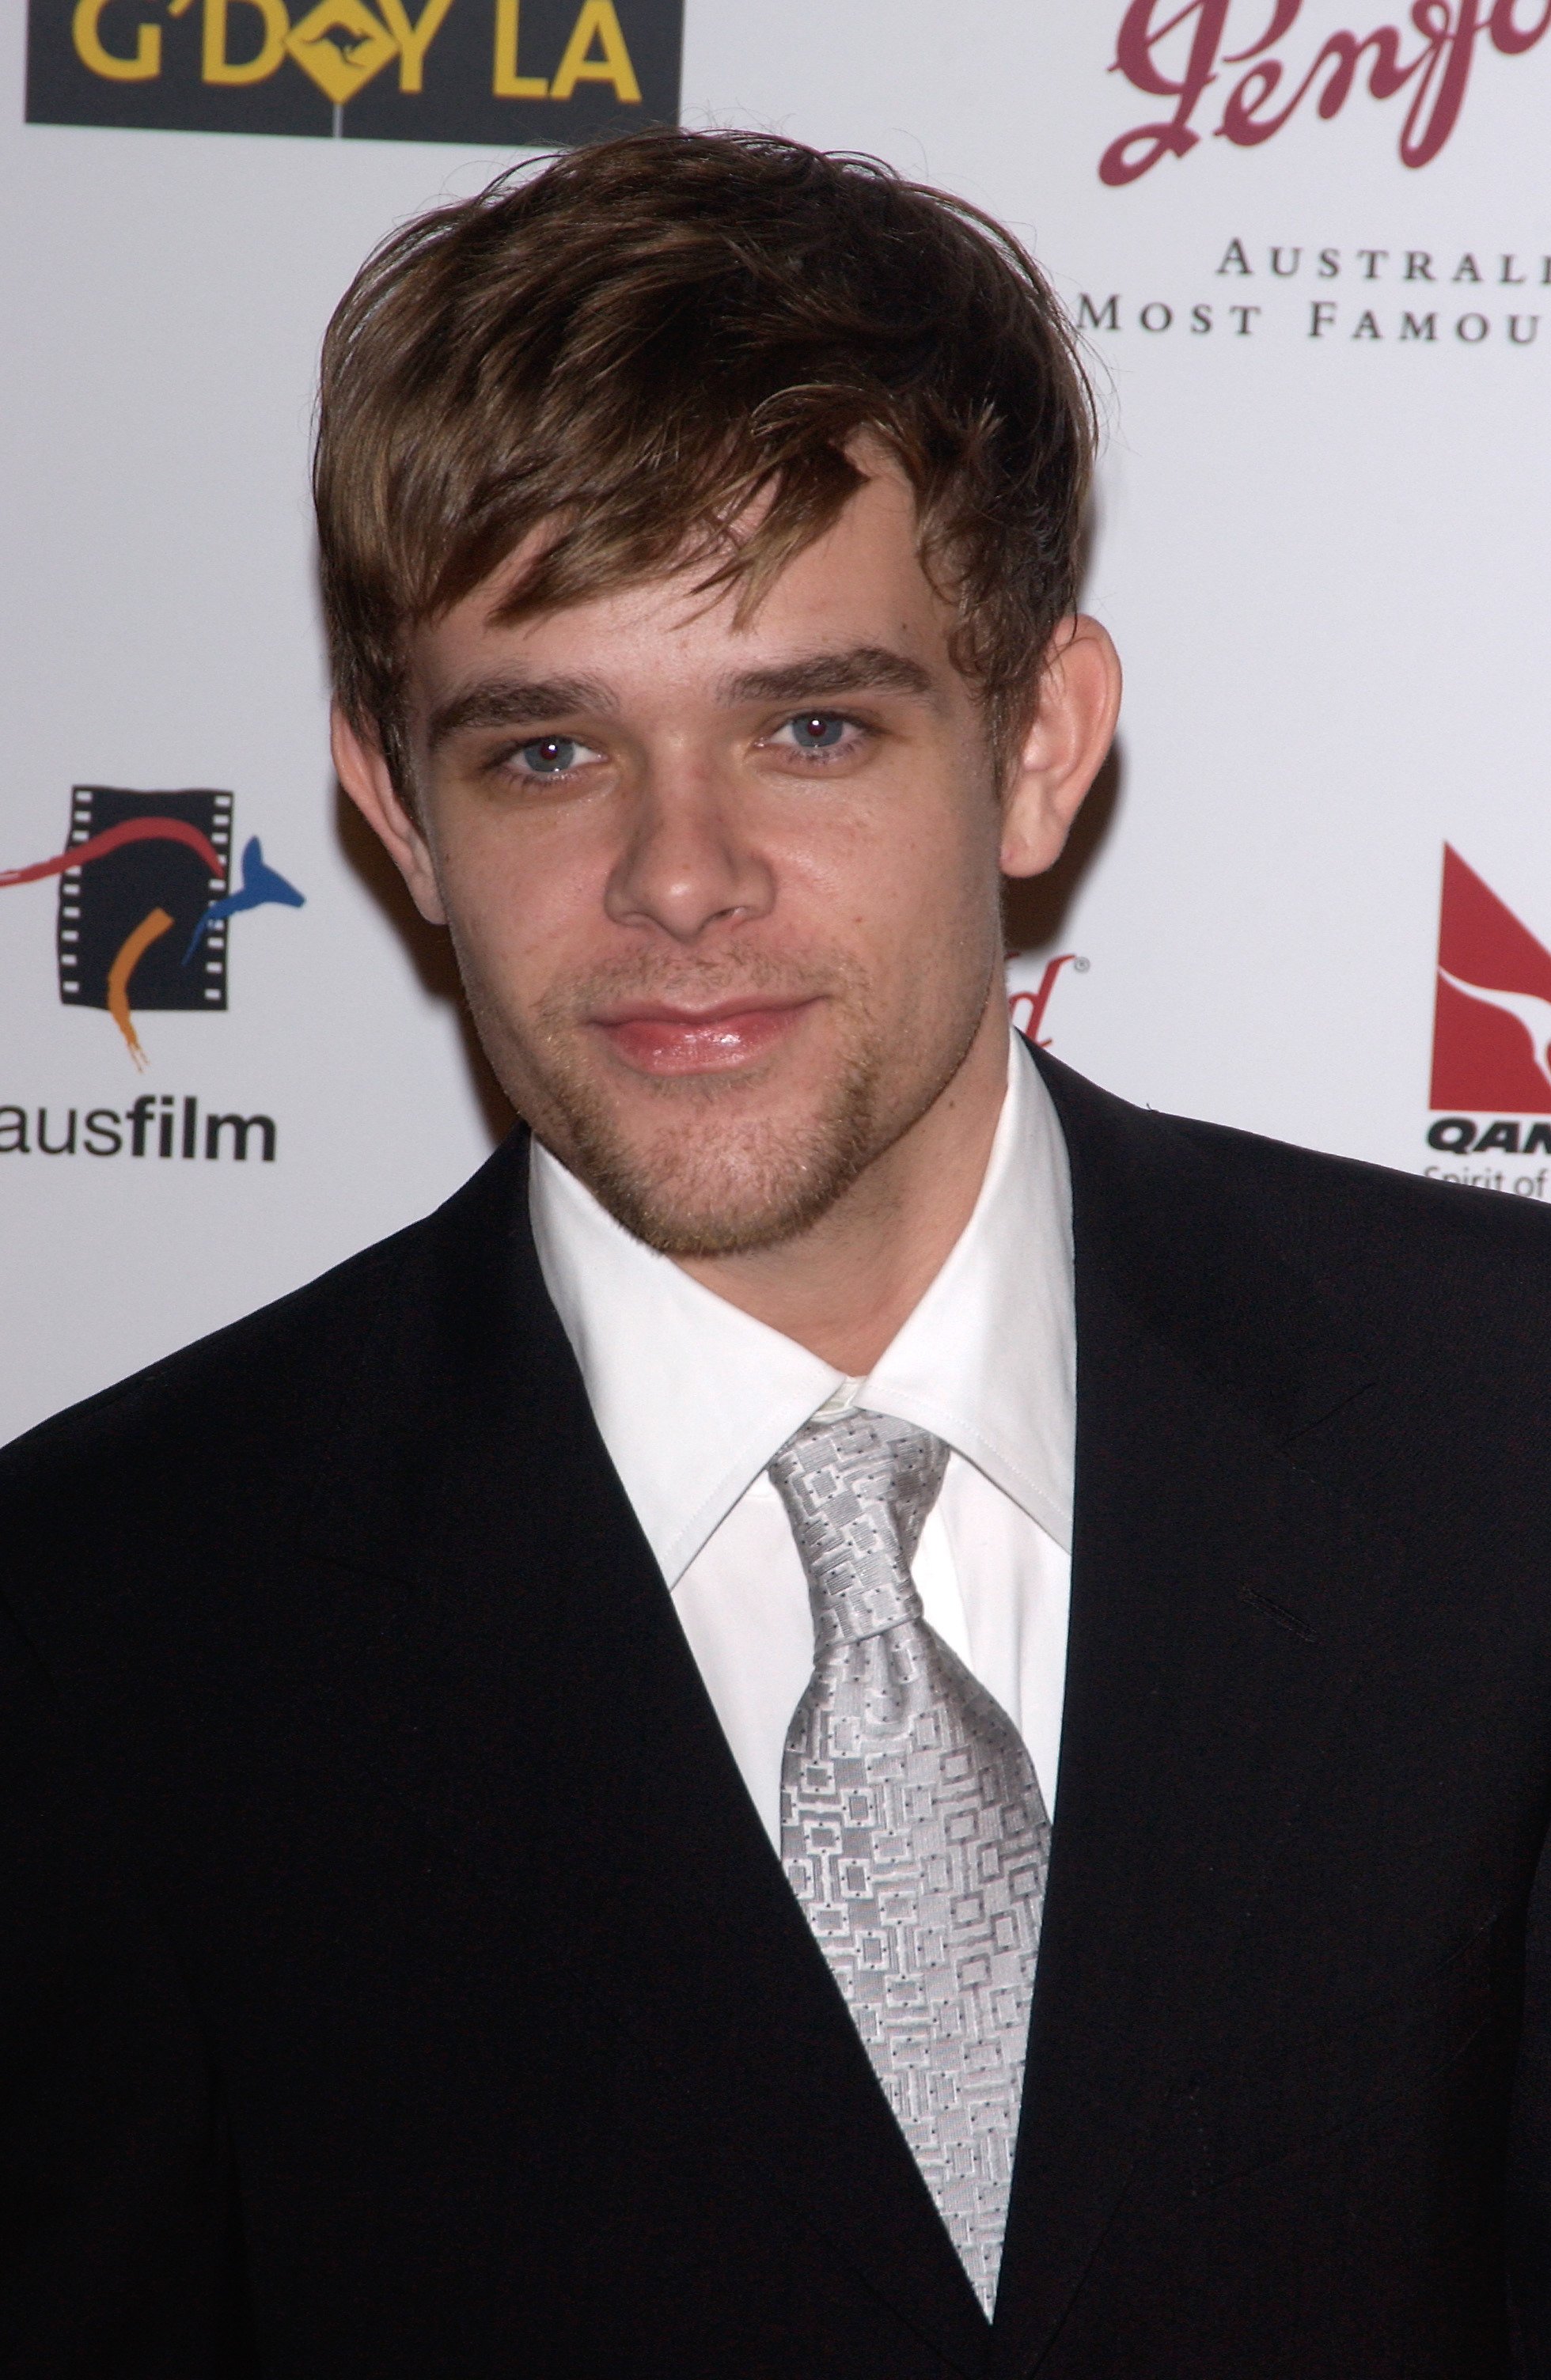 Nick Stahl at the G'Day LA Penfolds Gala on January 15, 2005 in Los Angeles, California | Photo: Shutterstock